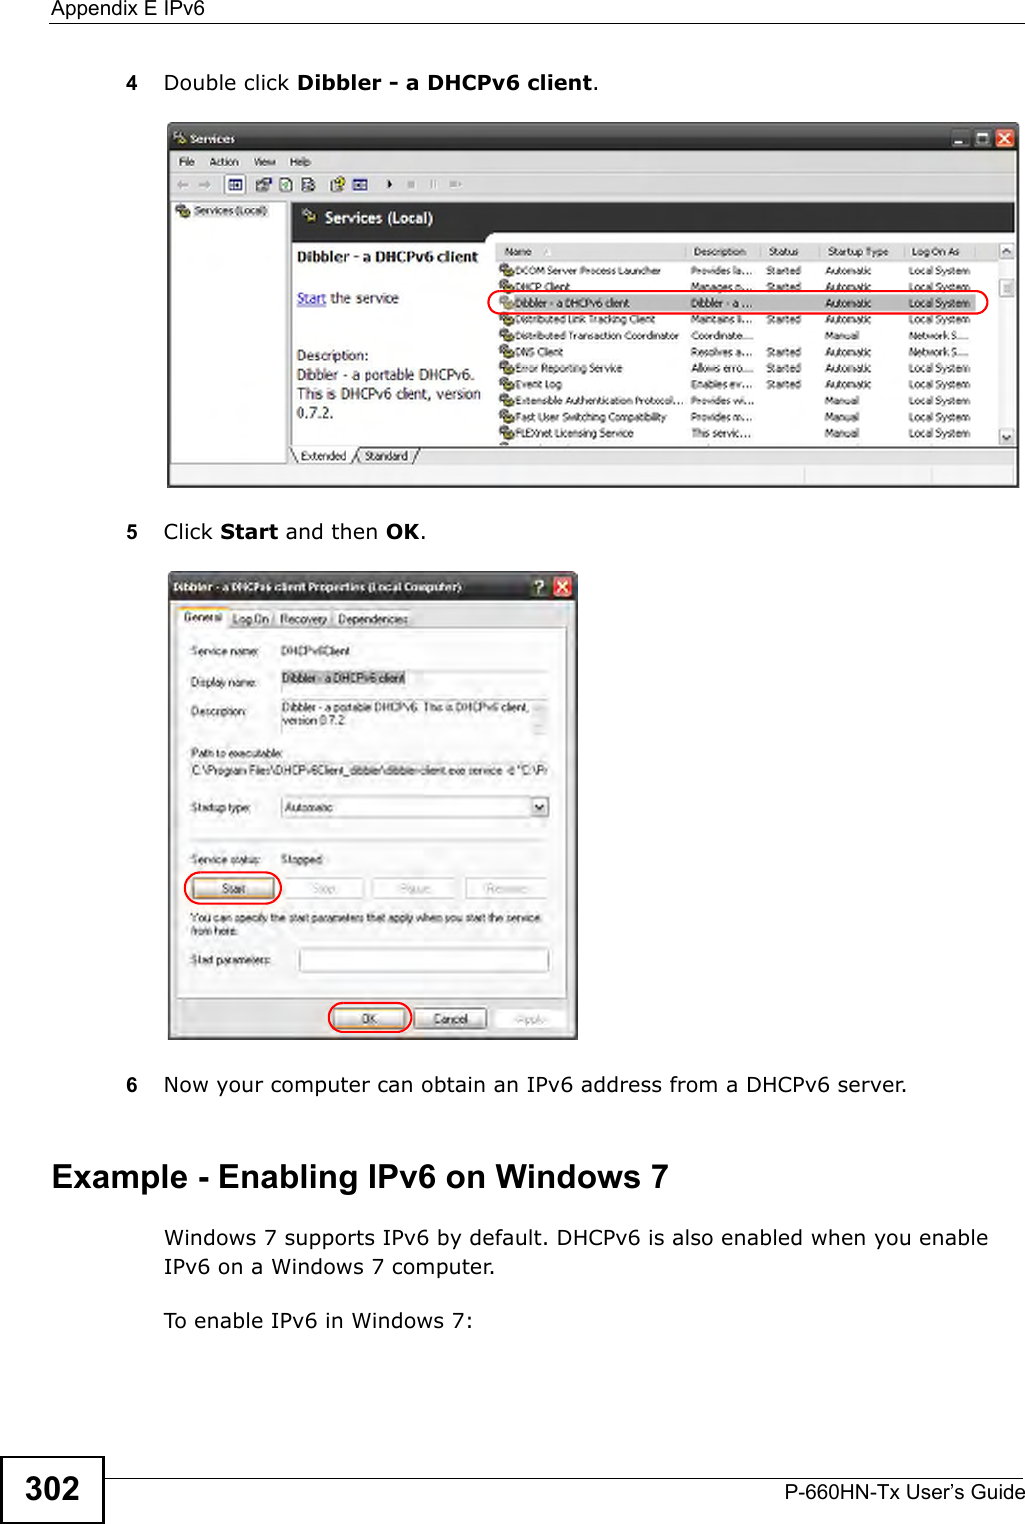 Appendix E IPv6P-660HN-Tx User’s Guide3024Double click Dibbler - a DHCPv6 client.5Click Start and then OK.6Now your computer can obtain an IPv6 address from a DHCPv6 server.Example - Enabling IPv6 on Windows 7Windows 7 supports IPv6 by default. DHCPv6 is also enabled when you enable IPv6 on a Windows 7 computer.To enable IPv6 in Windows 7: